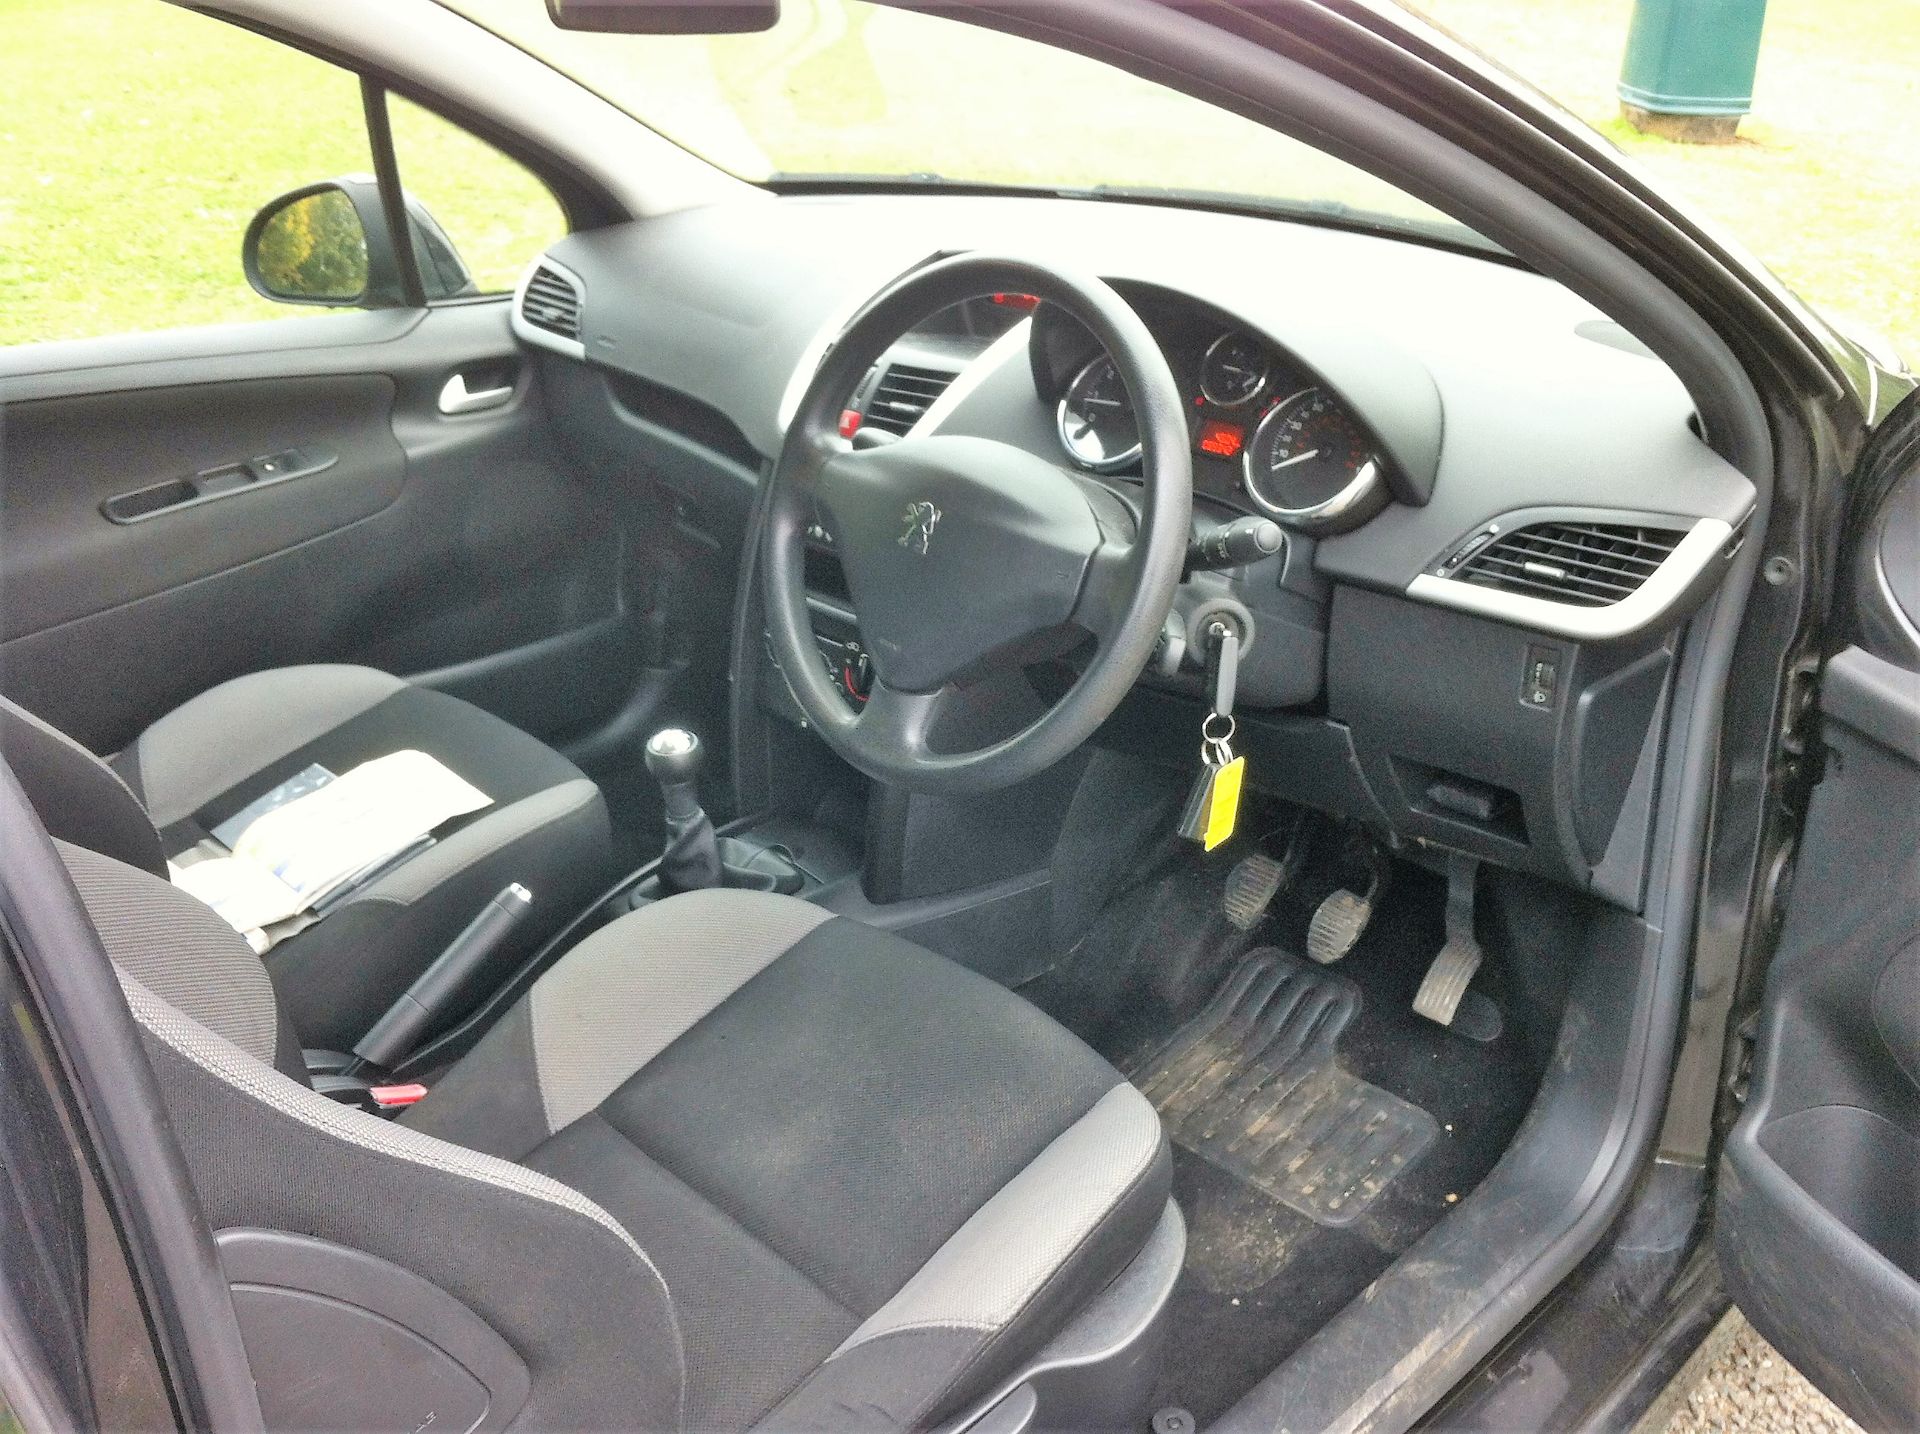 PEUGEOT 207 S - Image 8 of 13